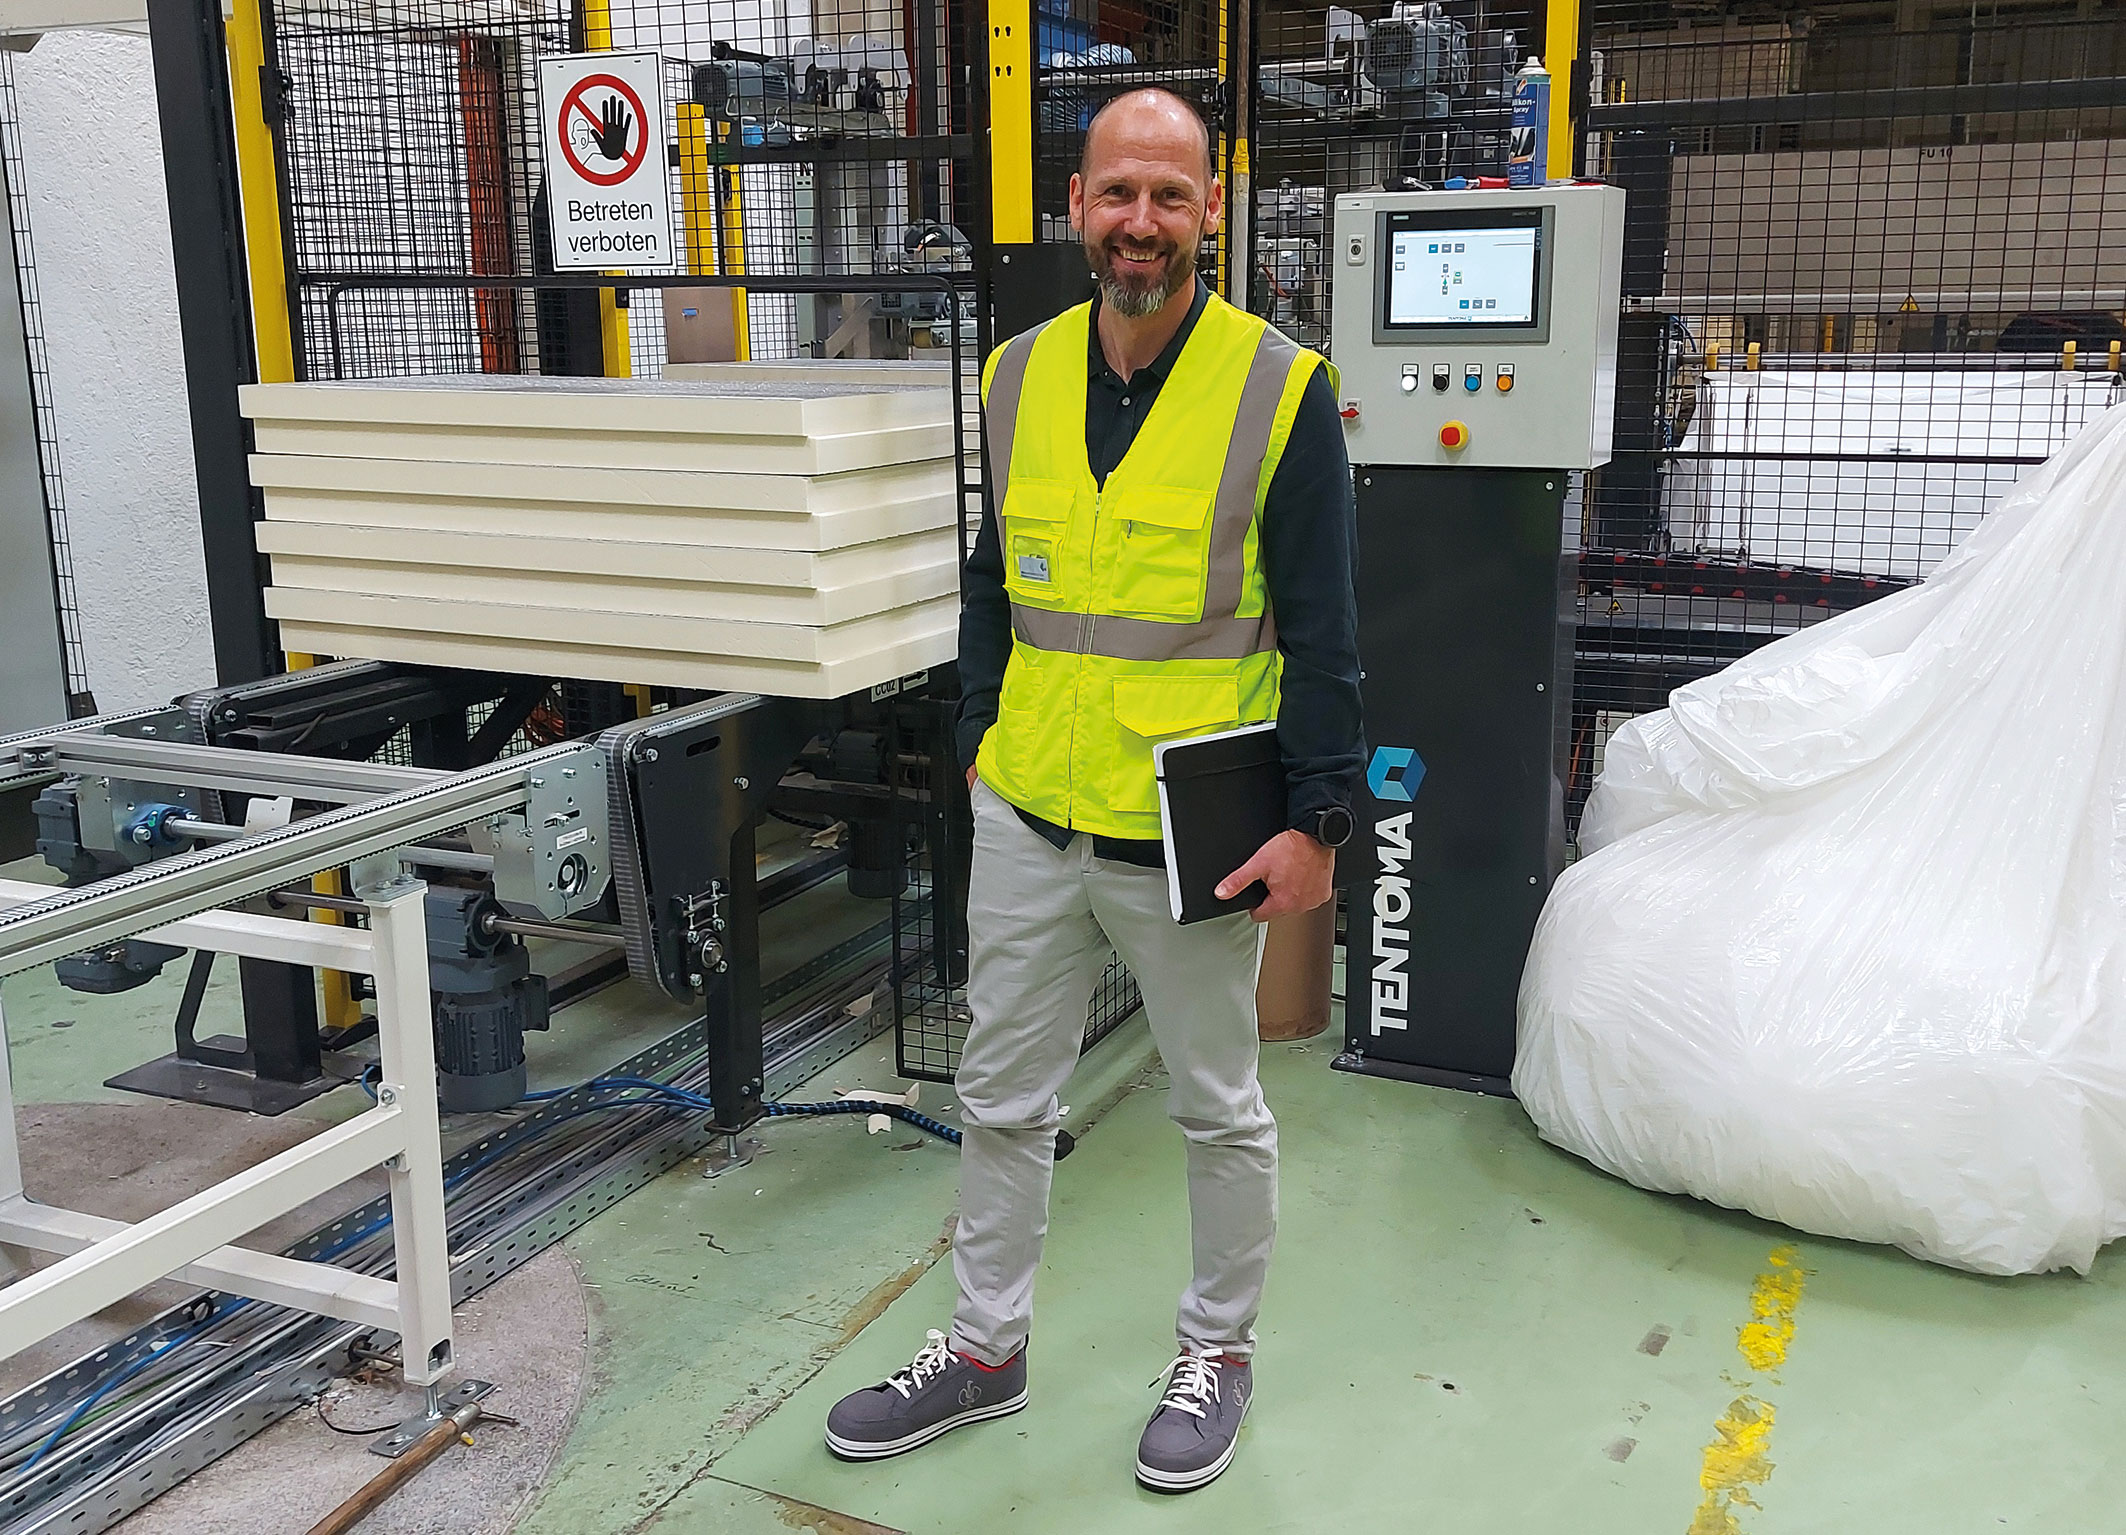 Production manager, Mr Markus Brandstätter: ”We are satisfied with the capacity and the packaging quality of the new RoRo StretchPack® packaging solution”.